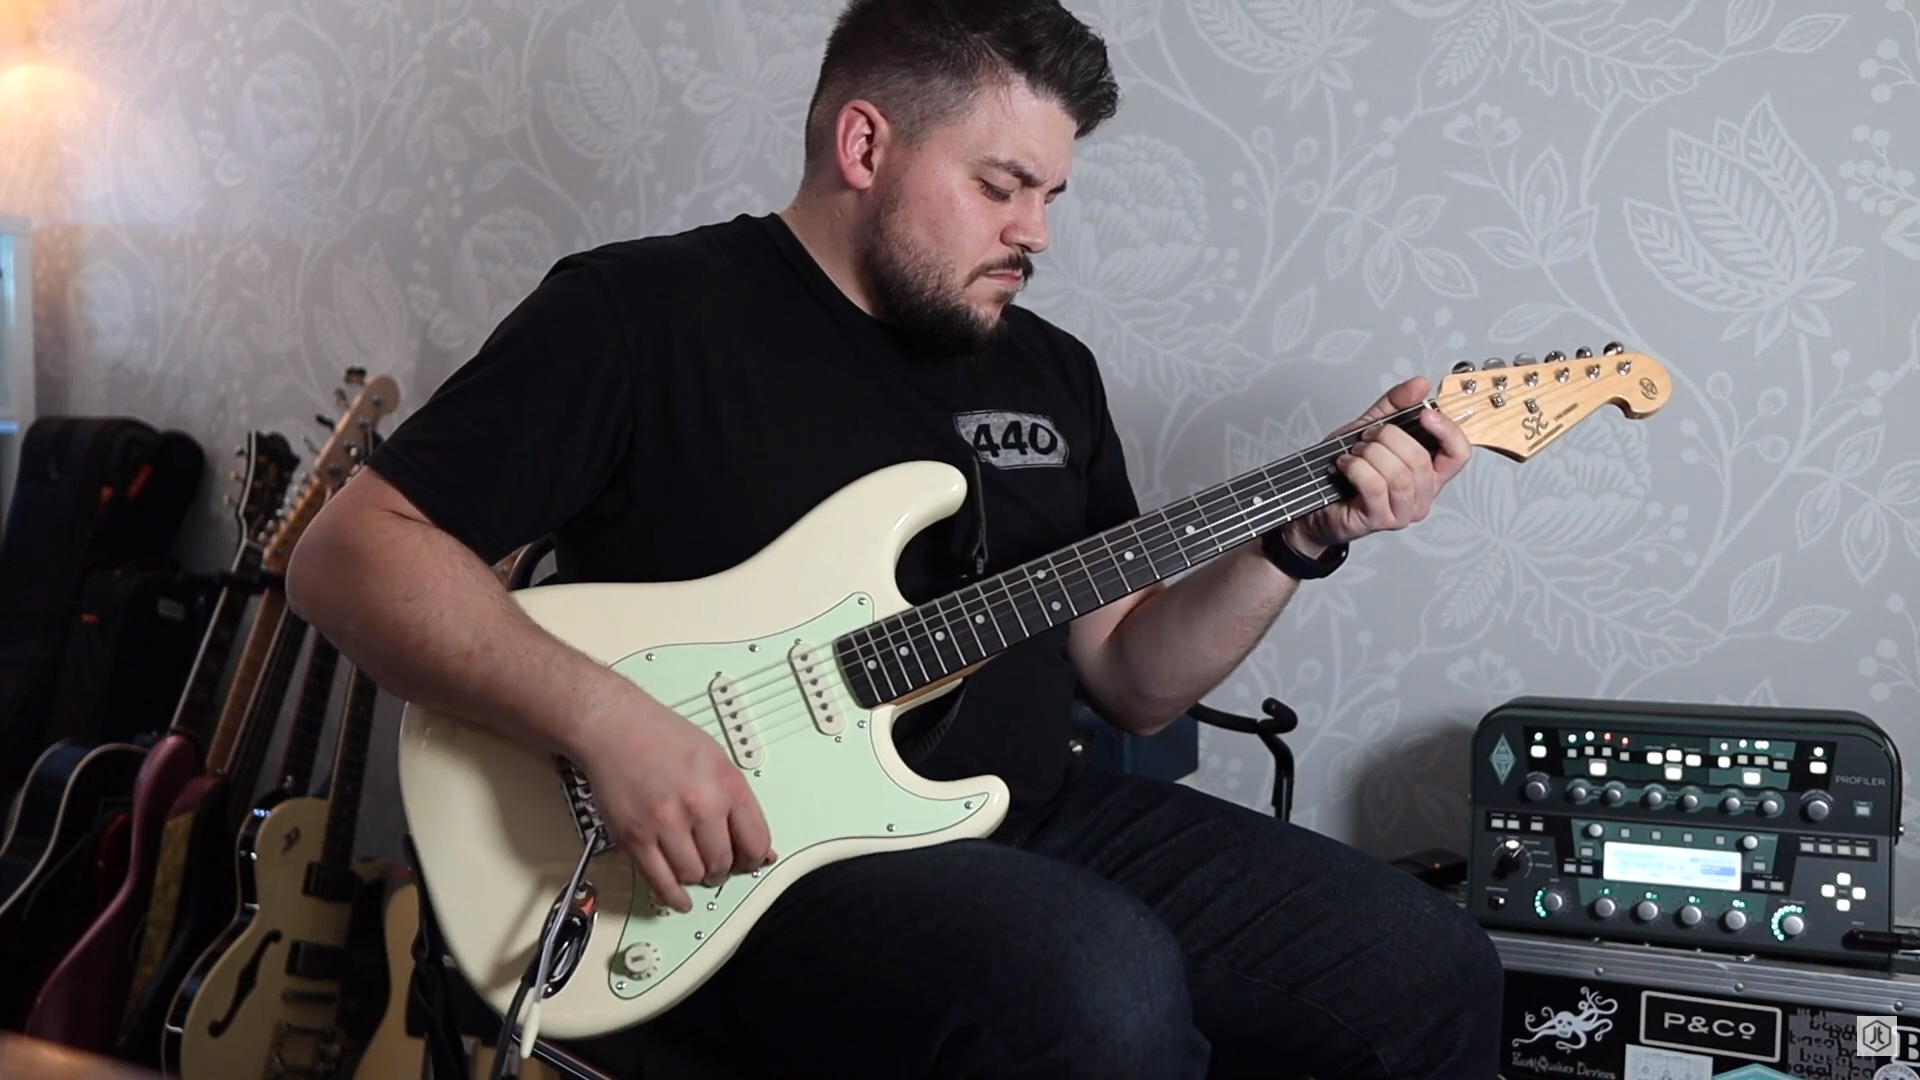 James Thain Music - SX SST62+ demo and review video!